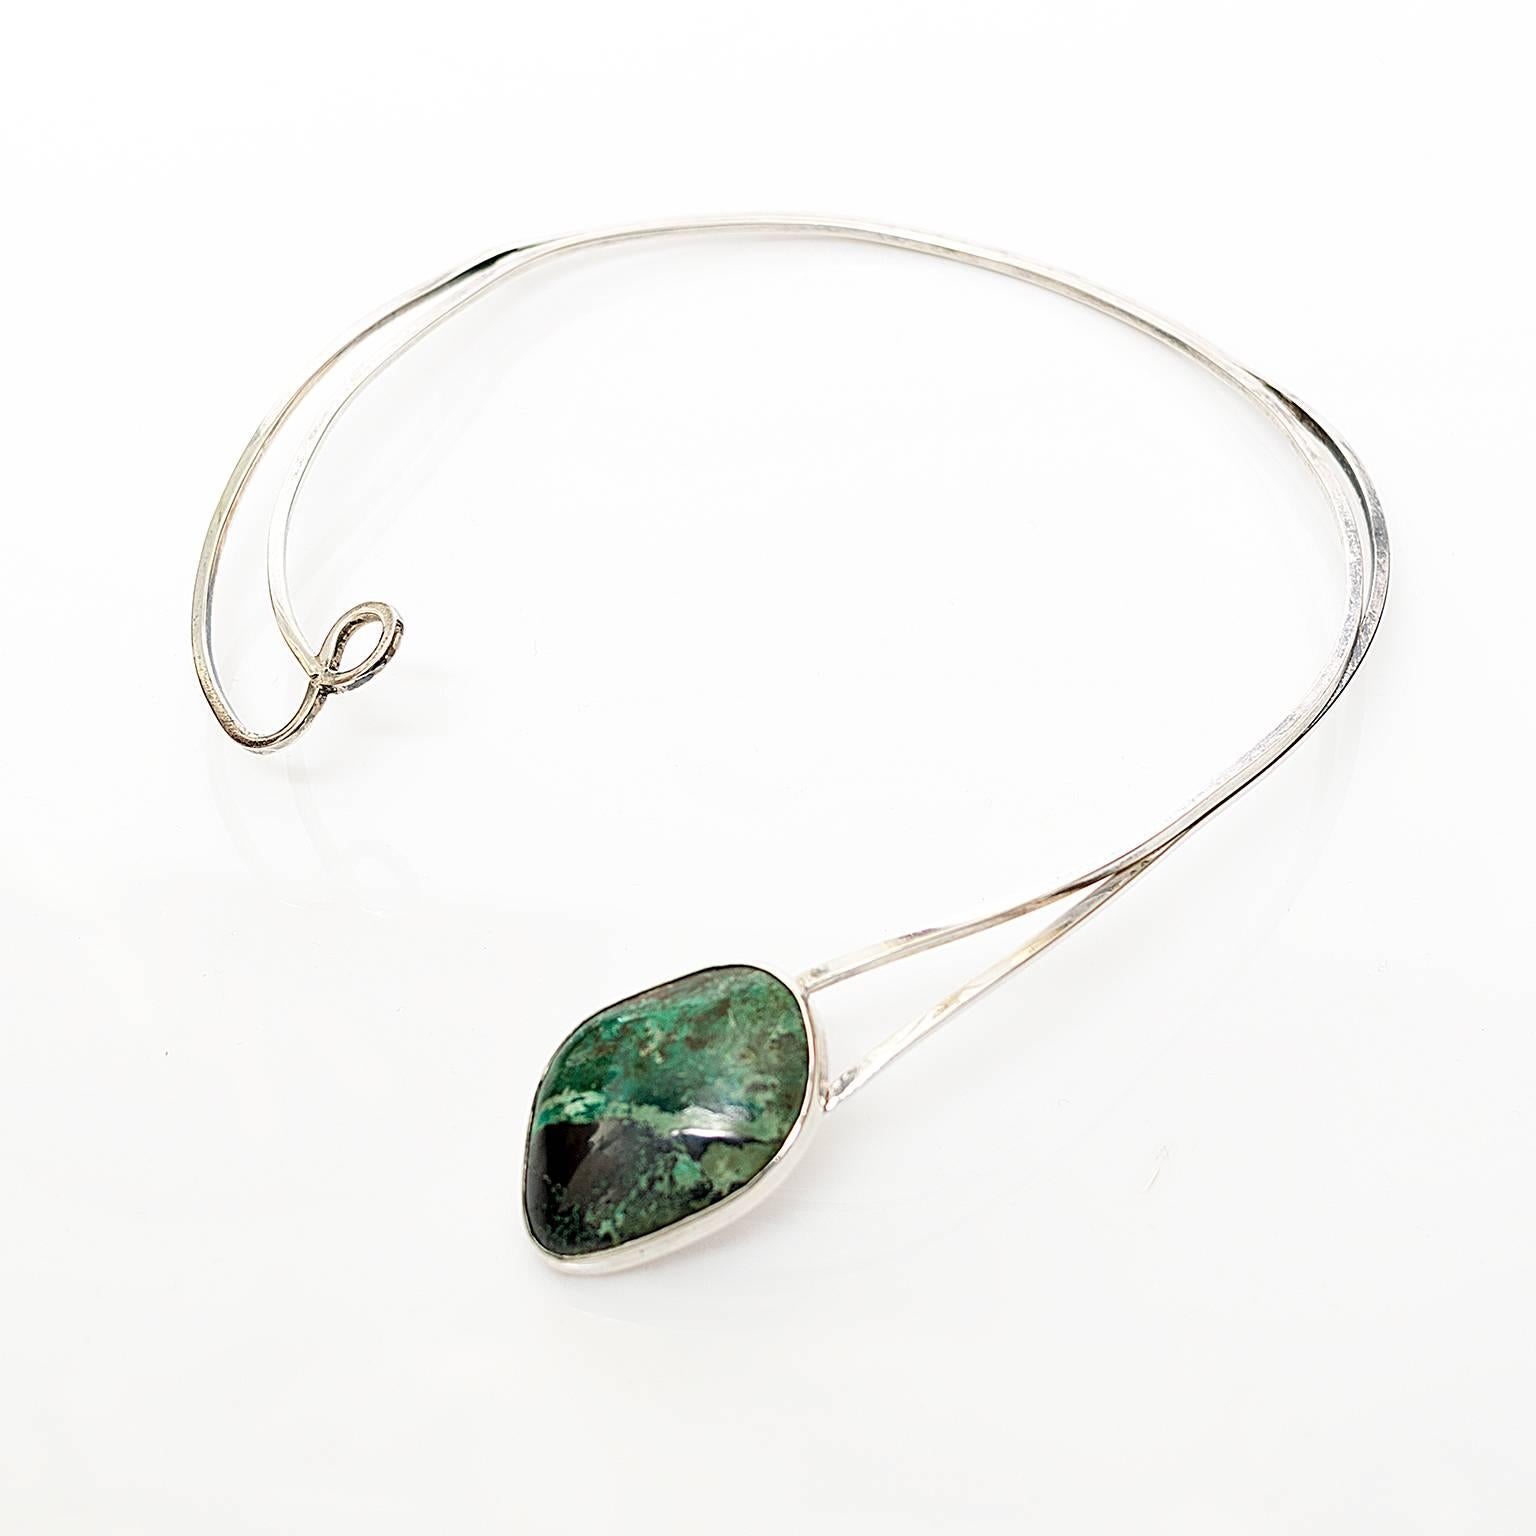 A Sterling Silver necklace detailed with a green stone cartouche. Designed by Issac Cohen, 1950's, Stockholm Sweden.
Diameter: 5.5